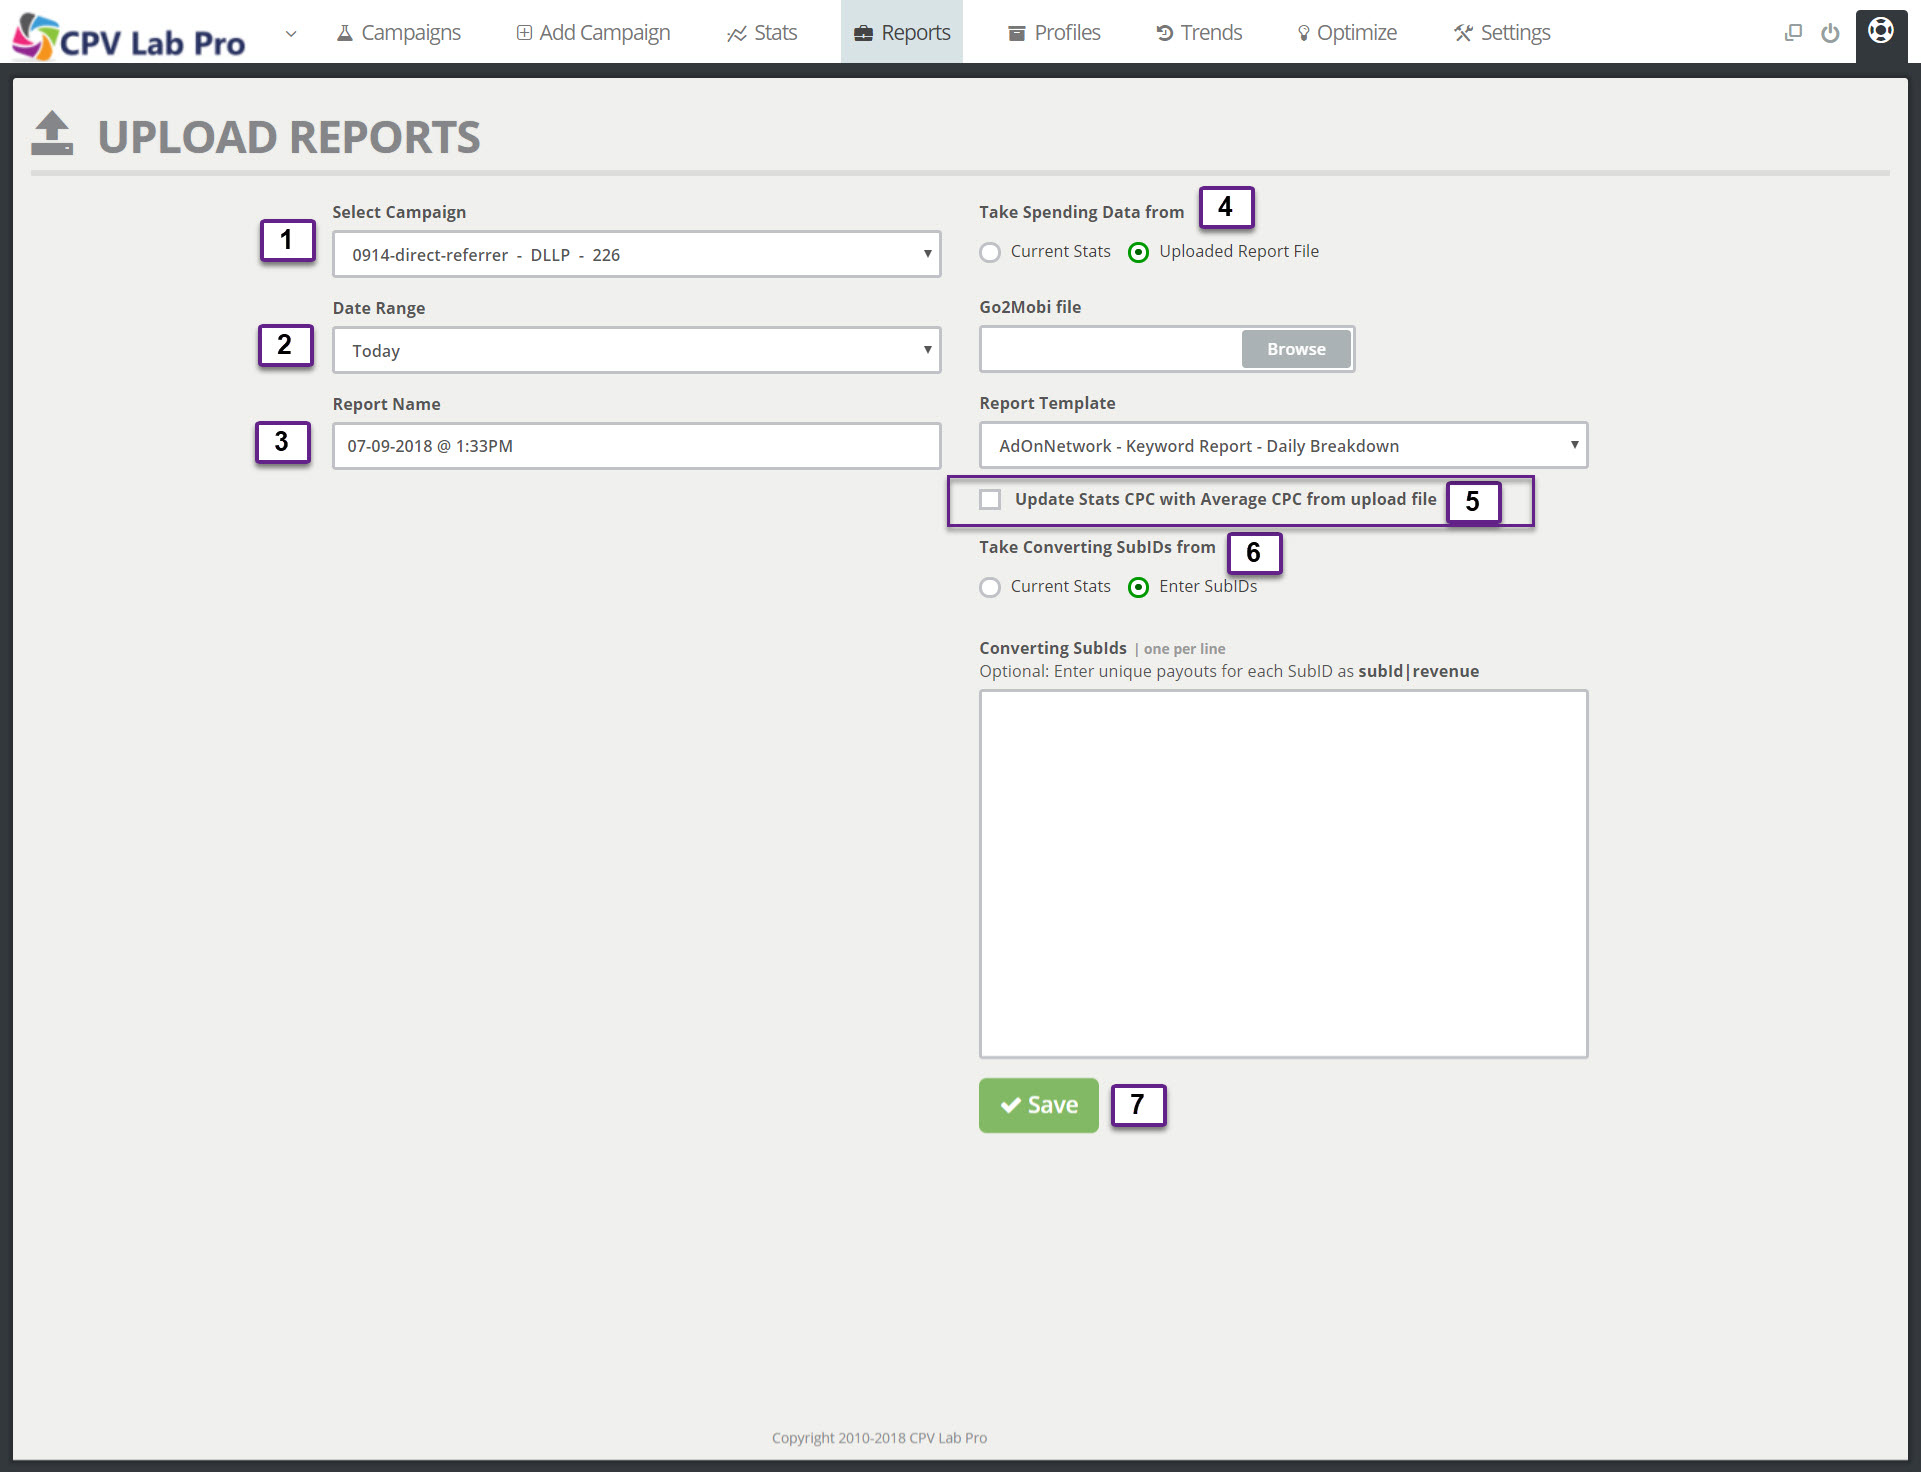 Upload Reports Page